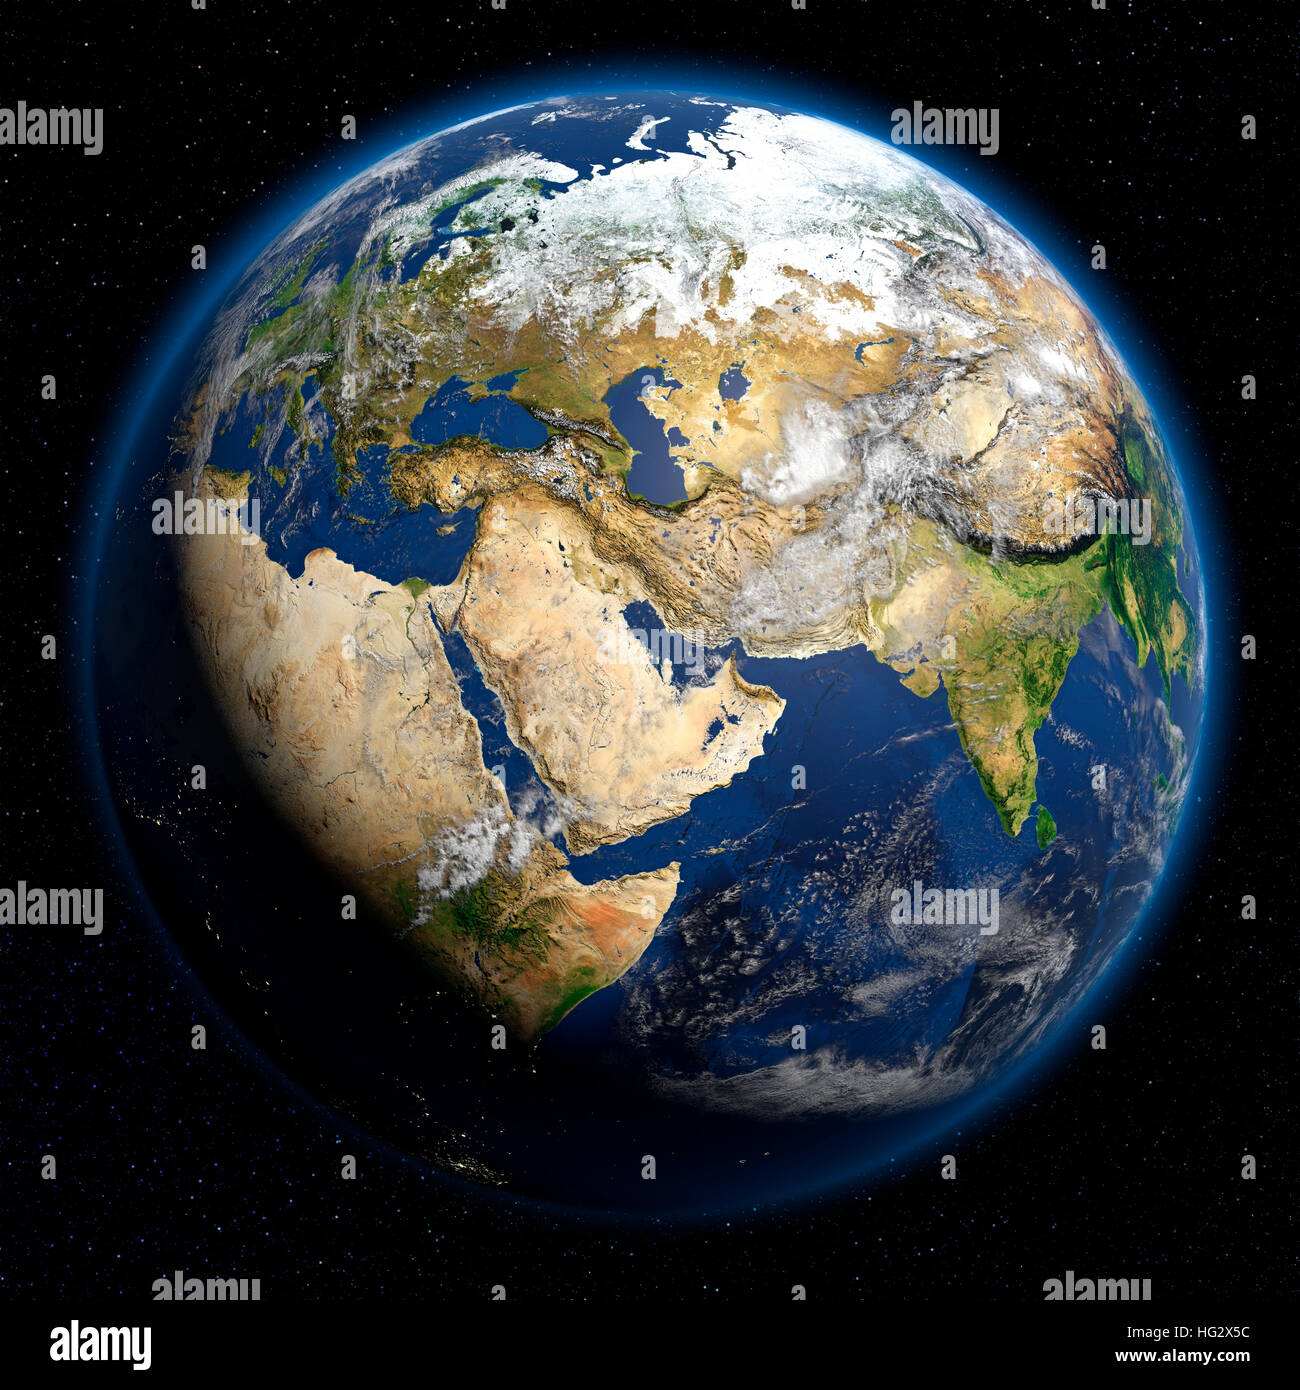 Earth viewed from space showing Middle East. Realistic digital illustration including relief map hill shading of terrain. Please credit Nasa. Stock Photo